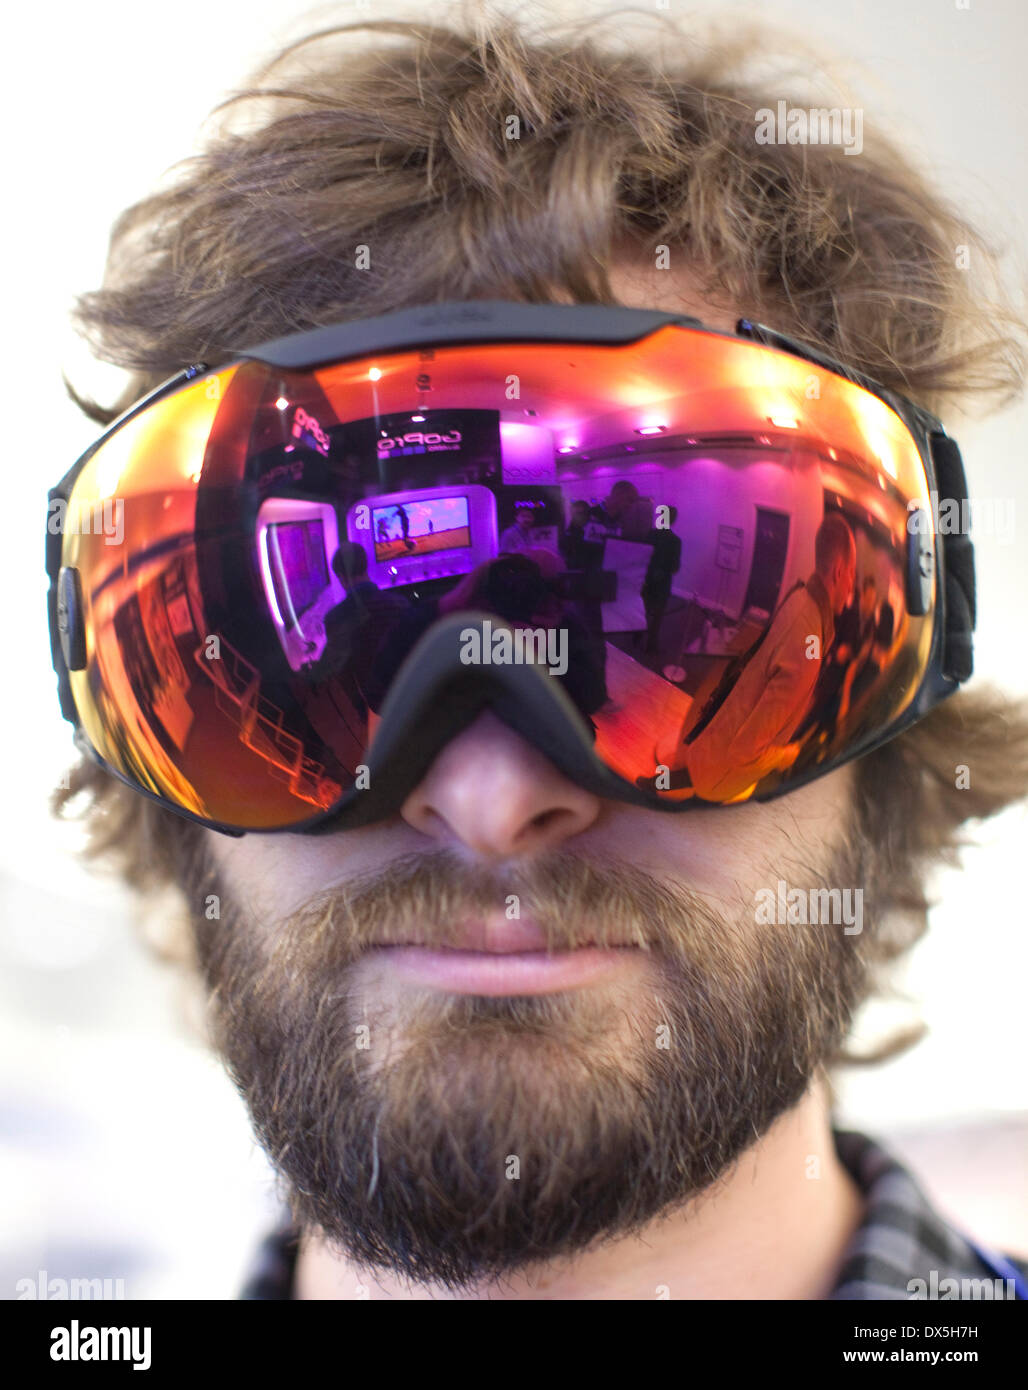 Wearable Technology Show, Olympia, London: Heads-up Display (HUD) goggles von Recon Instruments Stockfoto